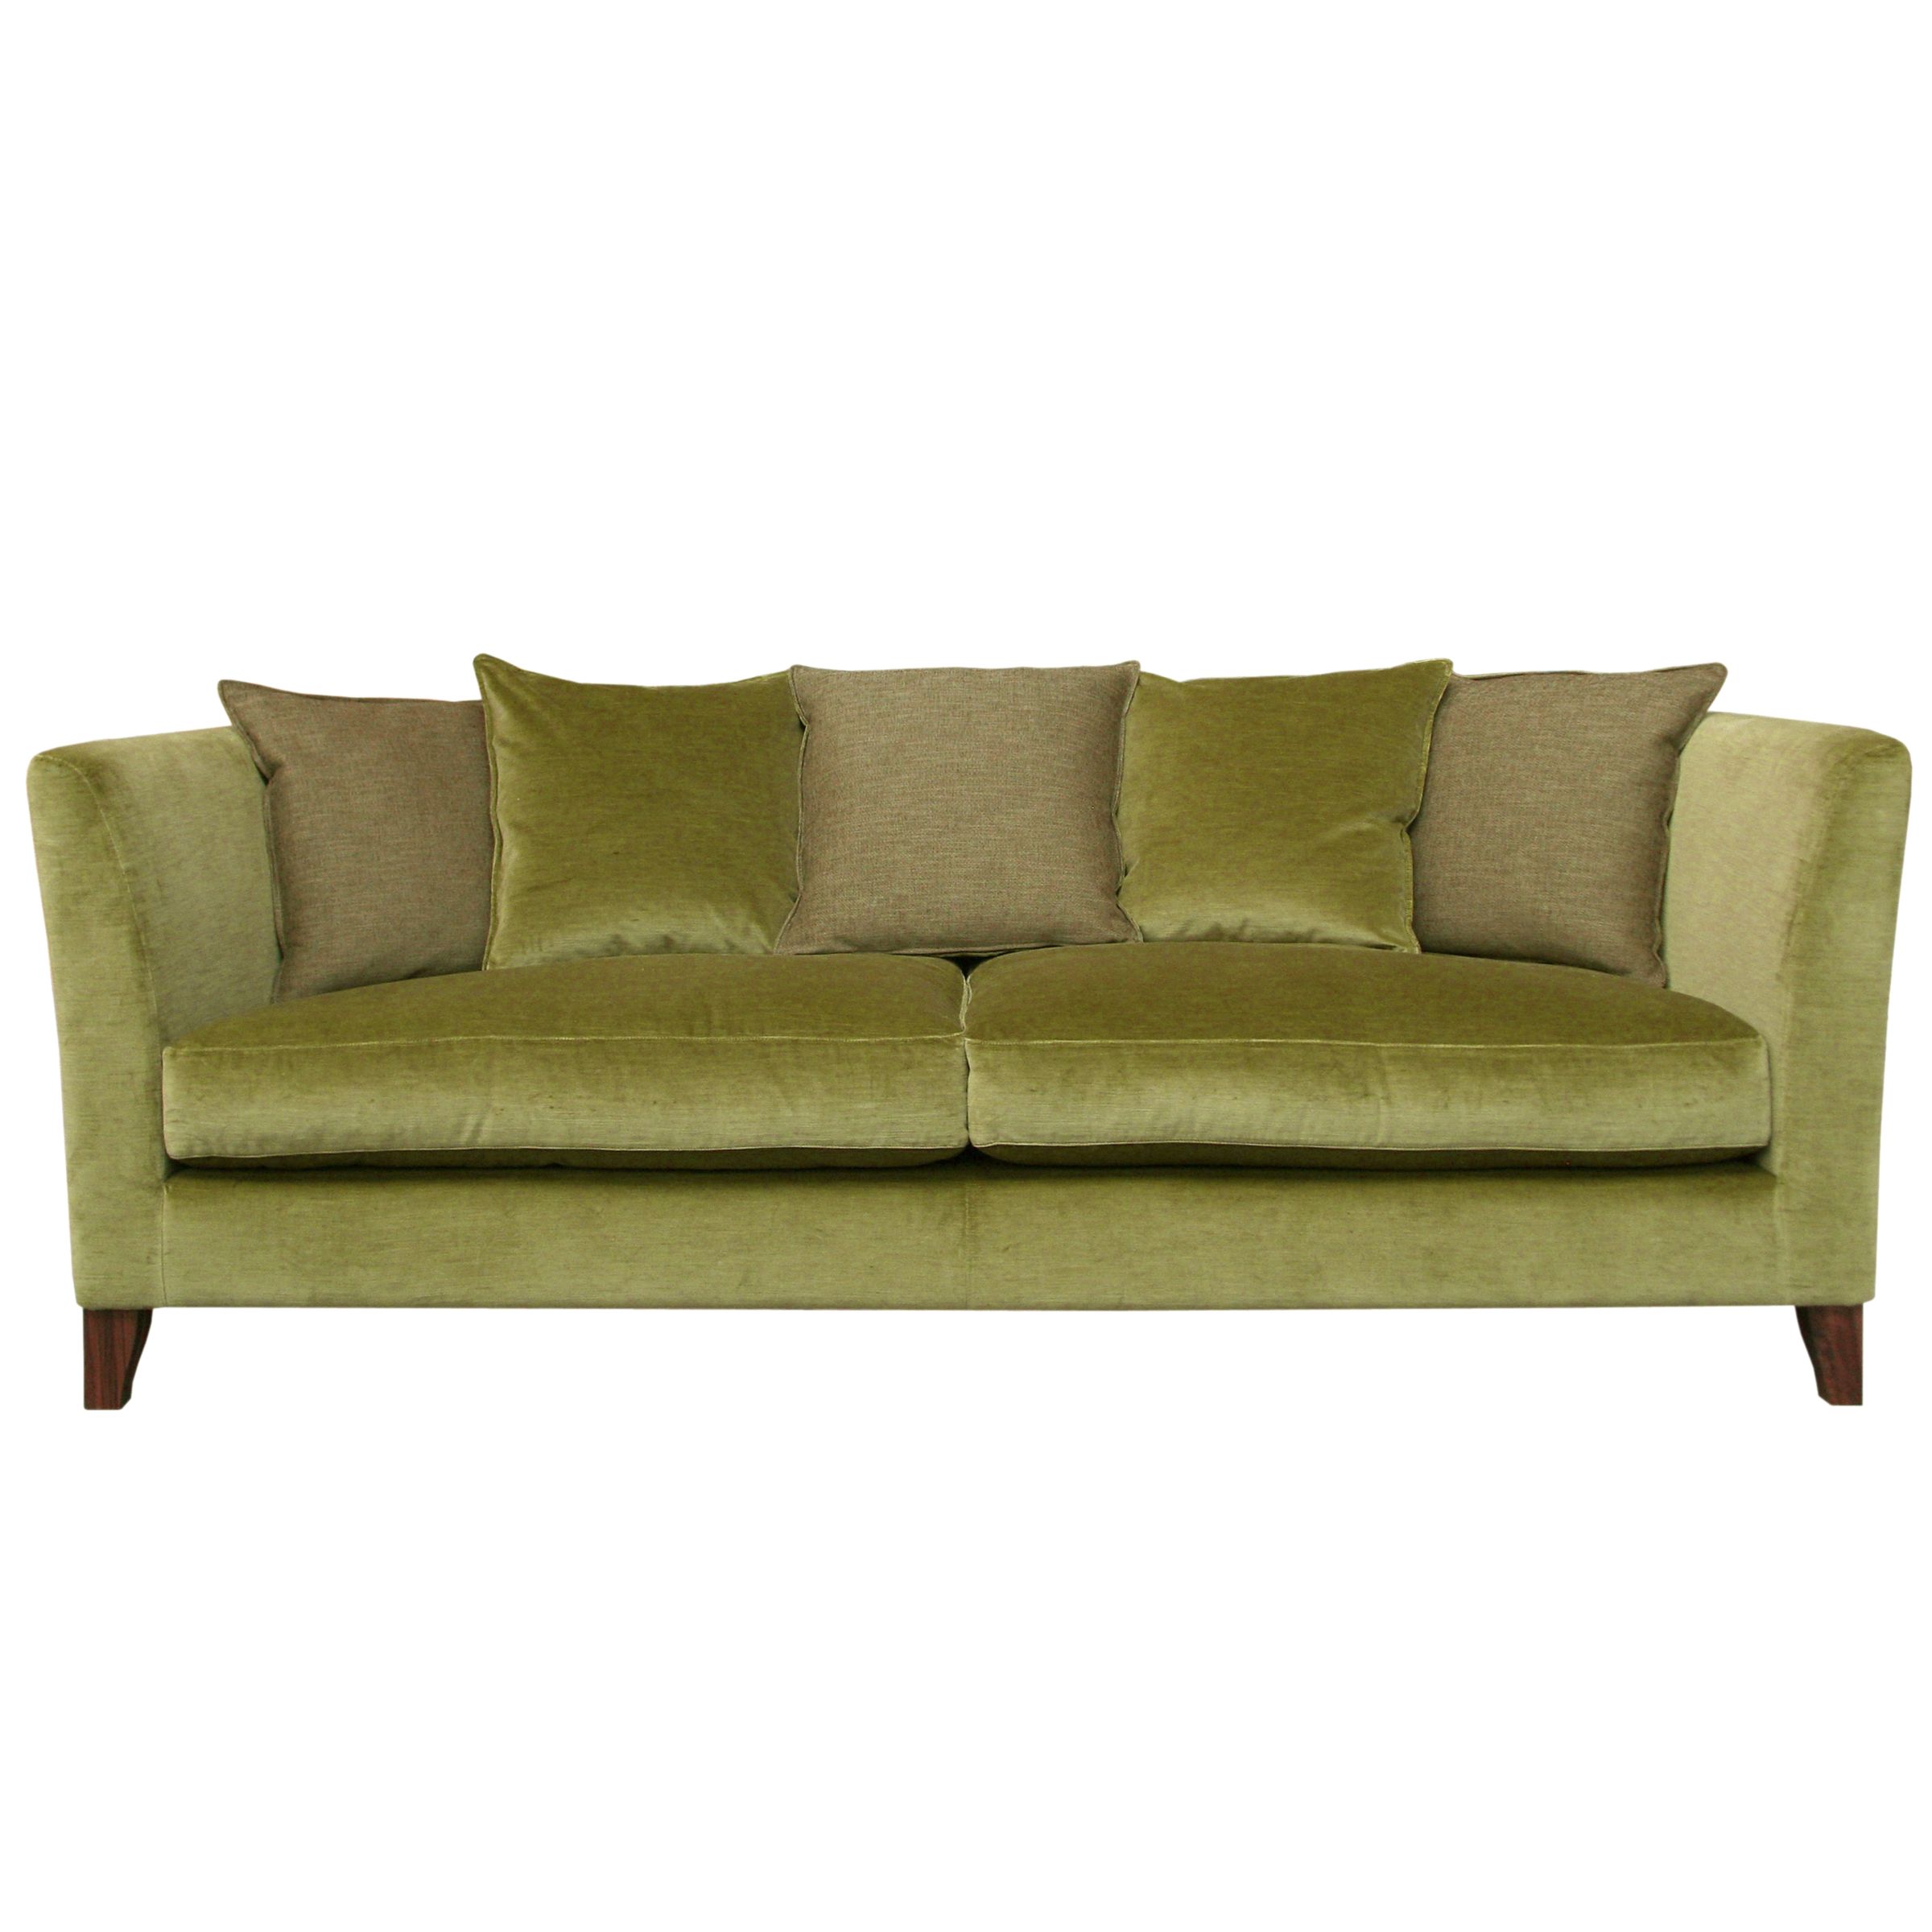 Collection Scatter Back Grand Sofa,